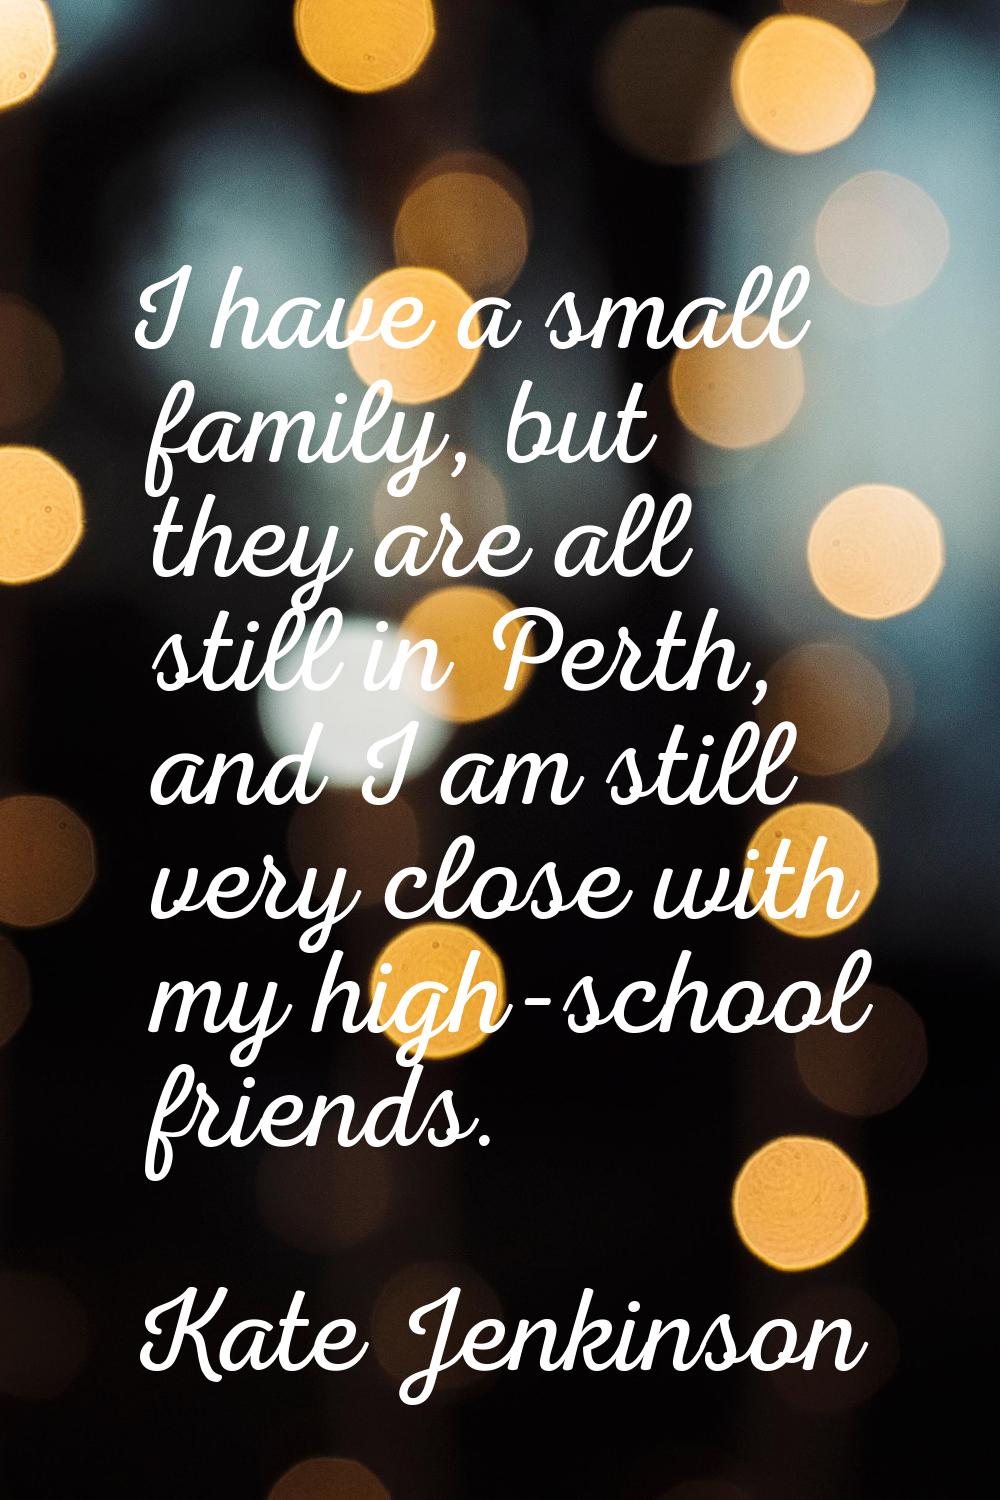 I have a small family, but they are all still in Perth, and I am still very close with my high-scho